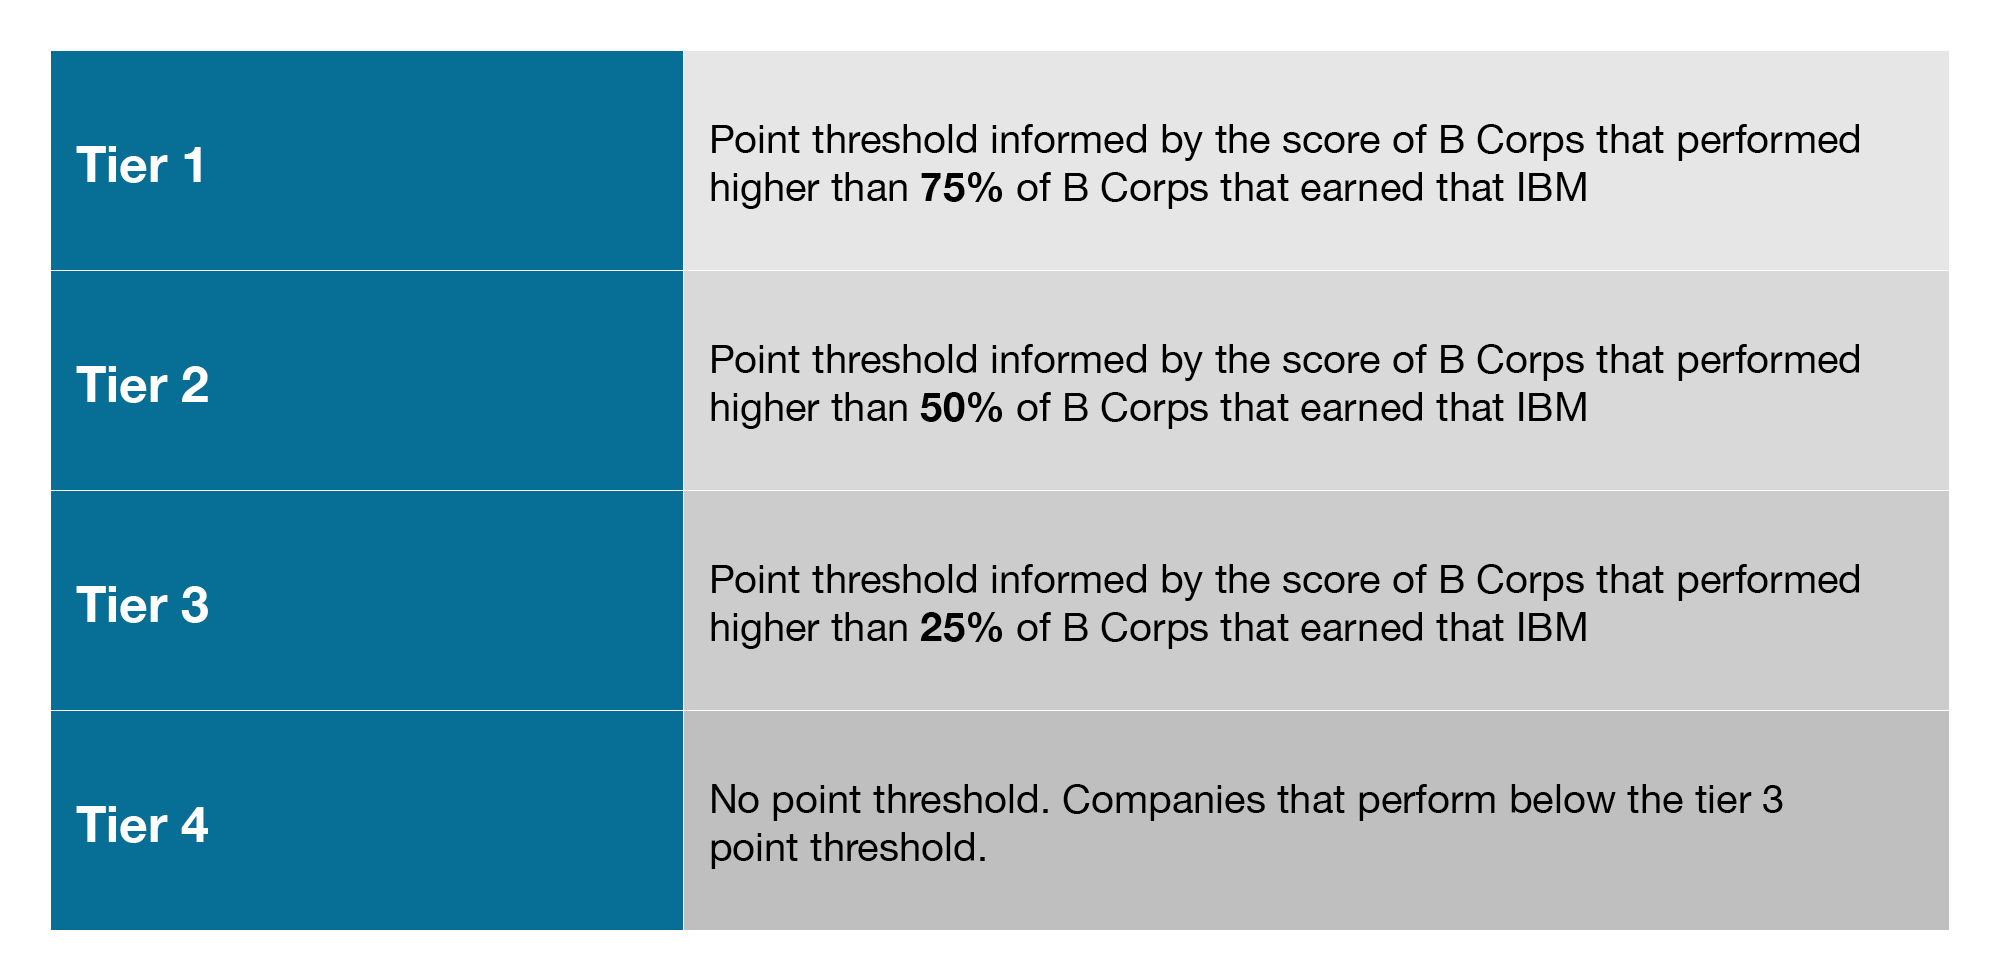 Tier 1, point threshold informed by the score of B Corps that performed higher than 75% of B Corps that earned that IBM. Tier 2, point threshold informed by the score of B Corps that performed higher than 50% of B Corps that earned that IBM. Tier 3, Point threshold informed by the score of B Corps that performed higher than 25% of B Corps that earned that IBM. Tier 4, no point threshold. Companies that perform below the tier 3 point threshold.